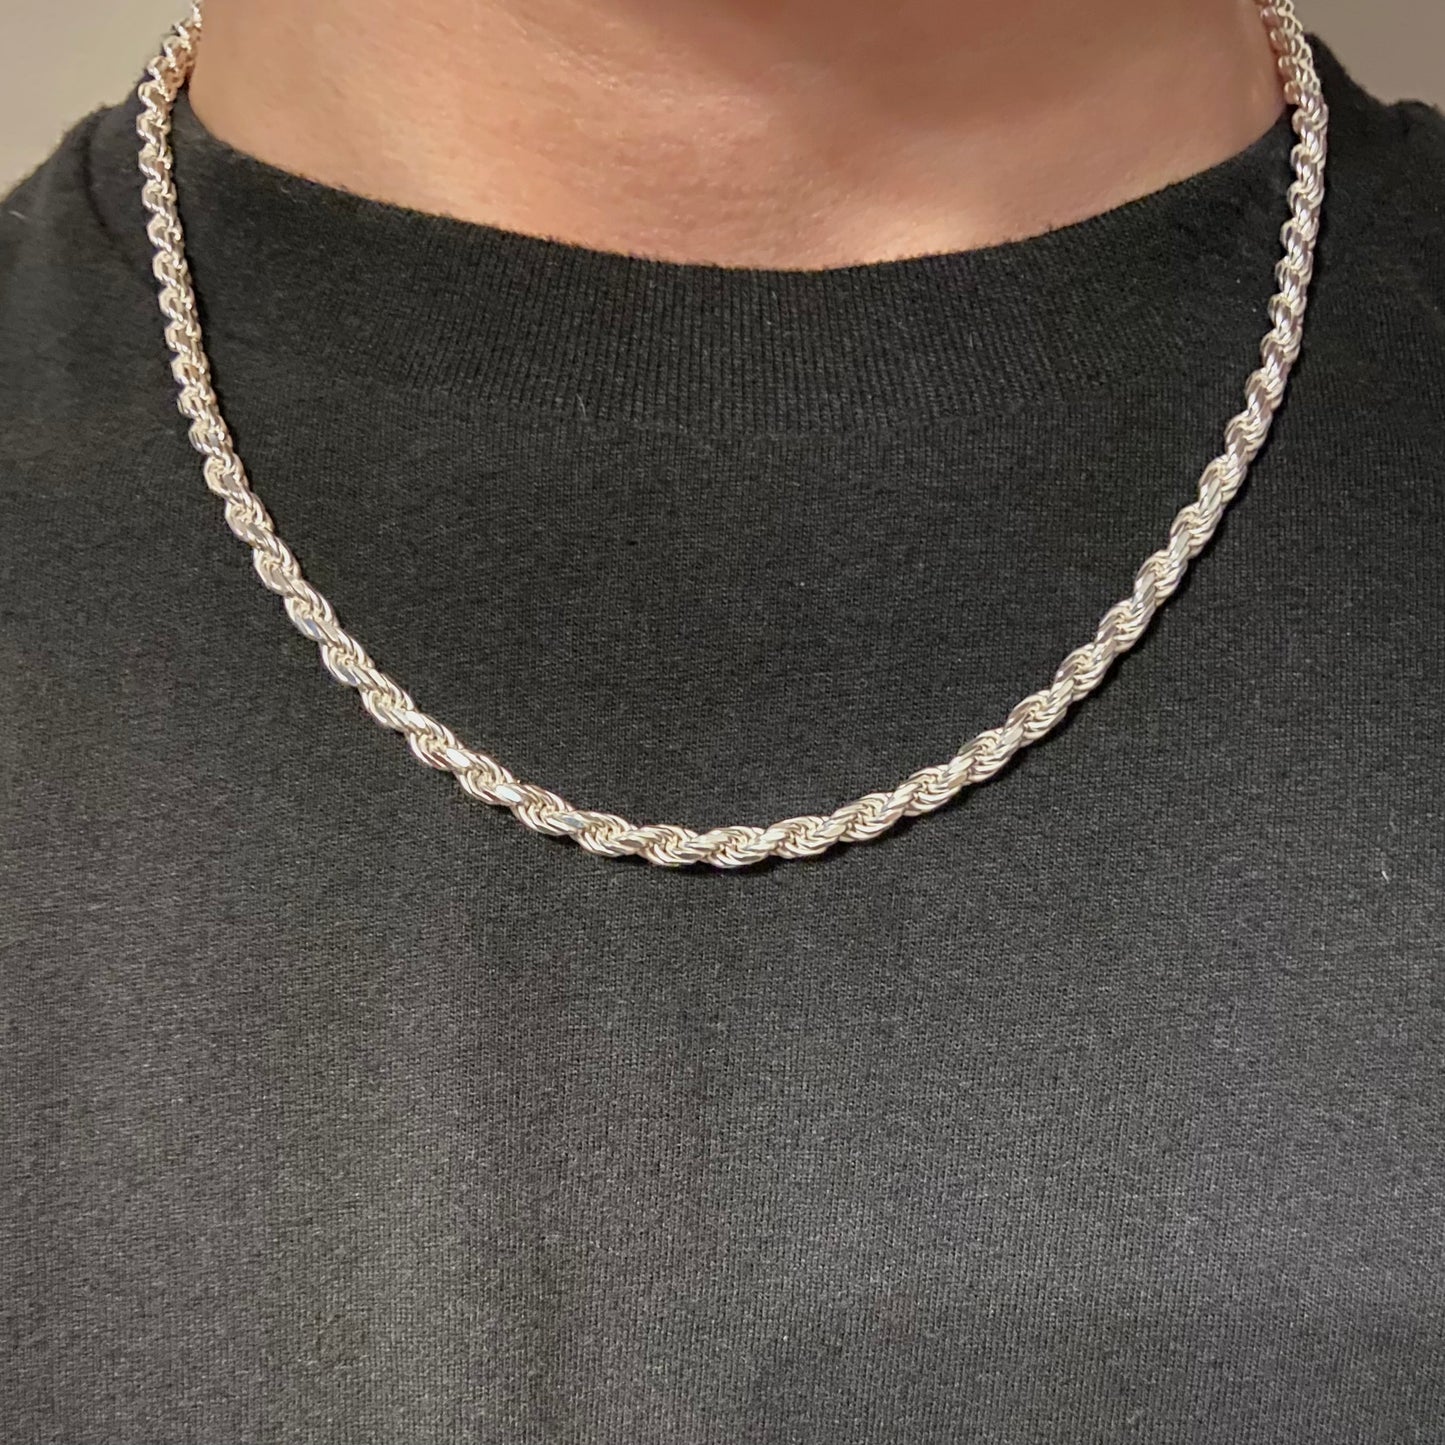 Solid Silver Rope Chain 18in 4mm